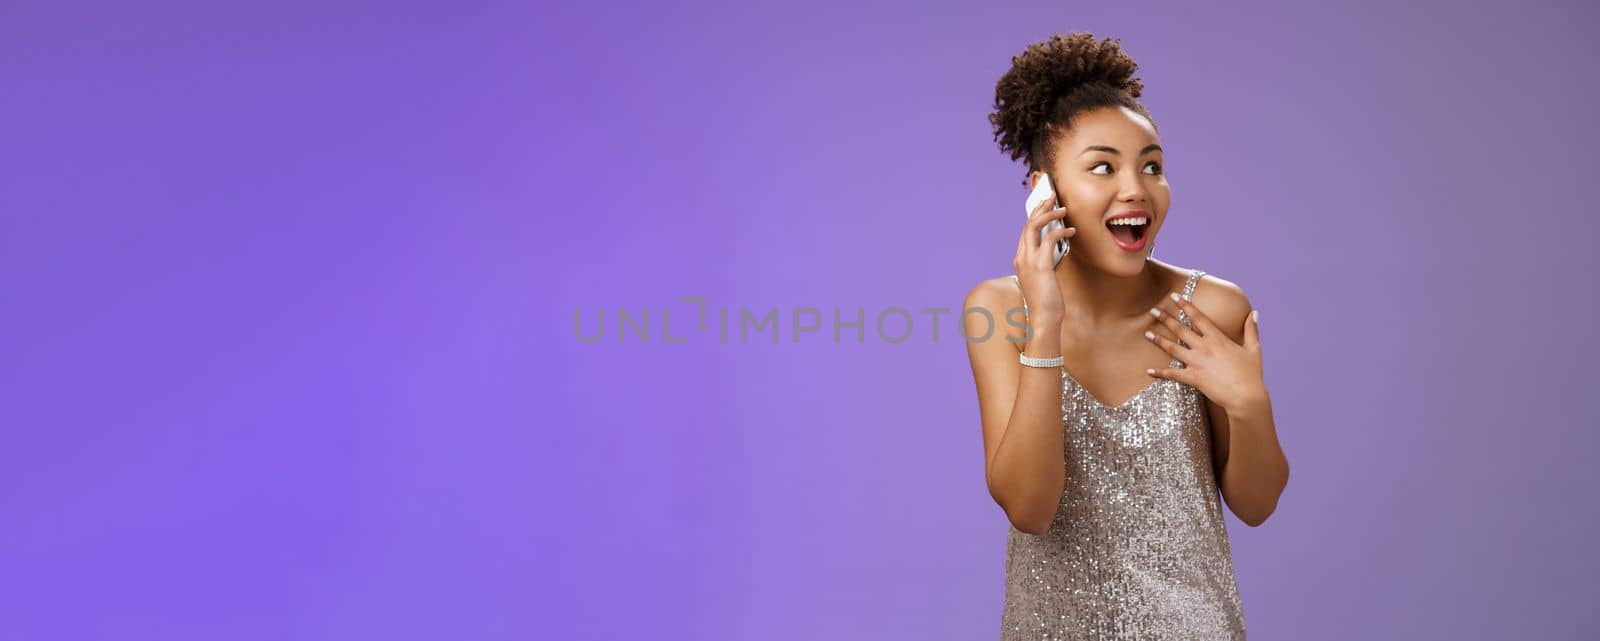 Impressed sociable african-american talkative woman in silver dress talking smartphone pointing herself amused describing emotions impressions after visit awesome party, blue background.